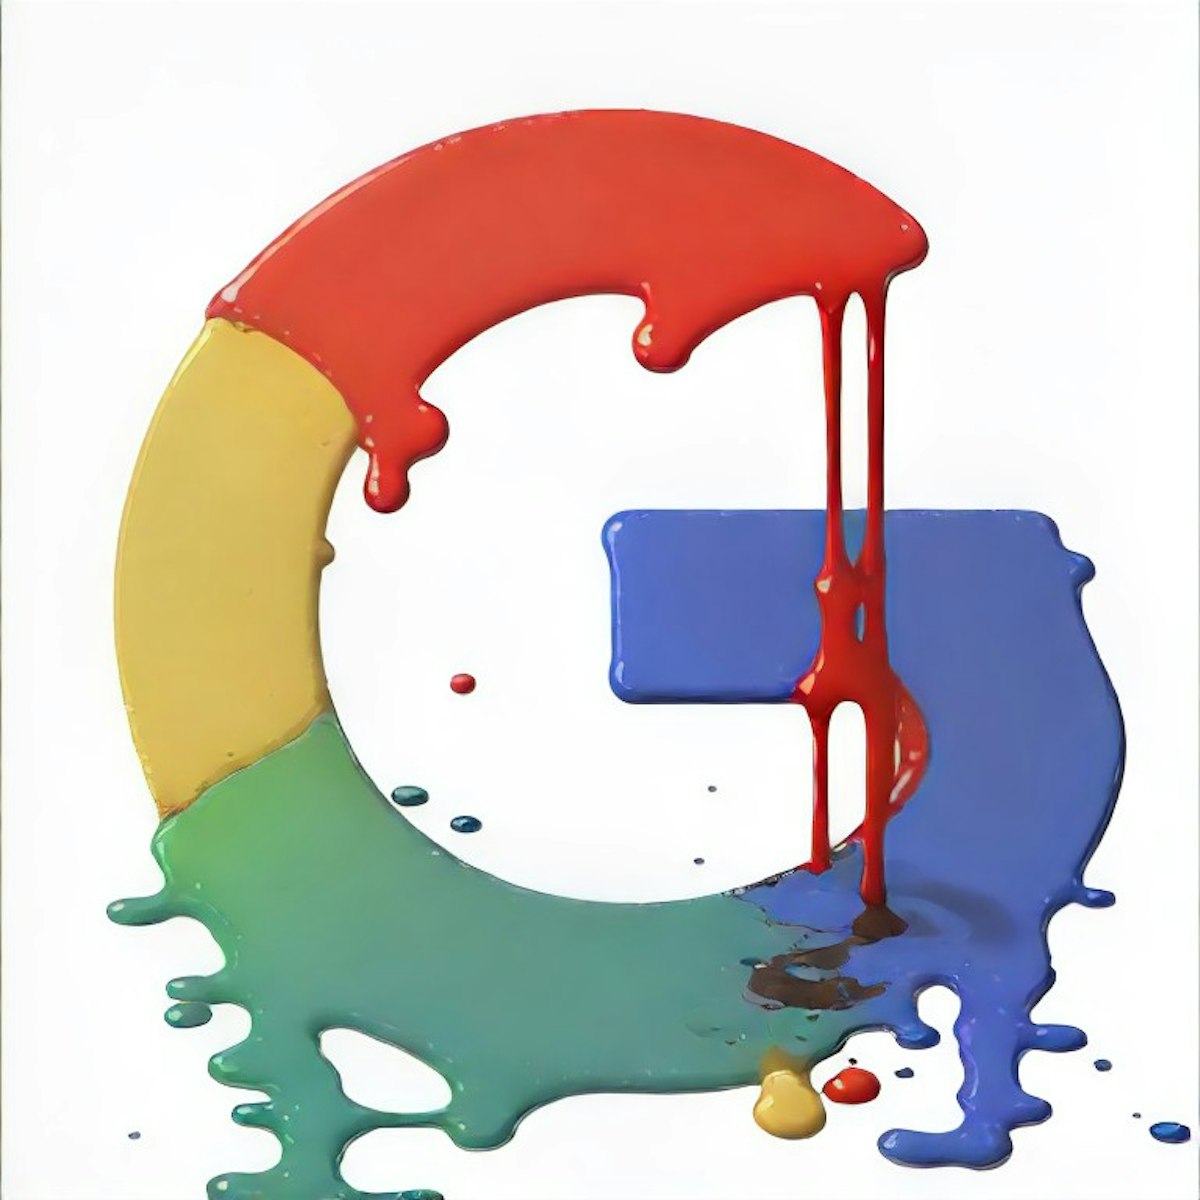 featured image - Why Google Sucks: But We're Stuck With Them (For Now)